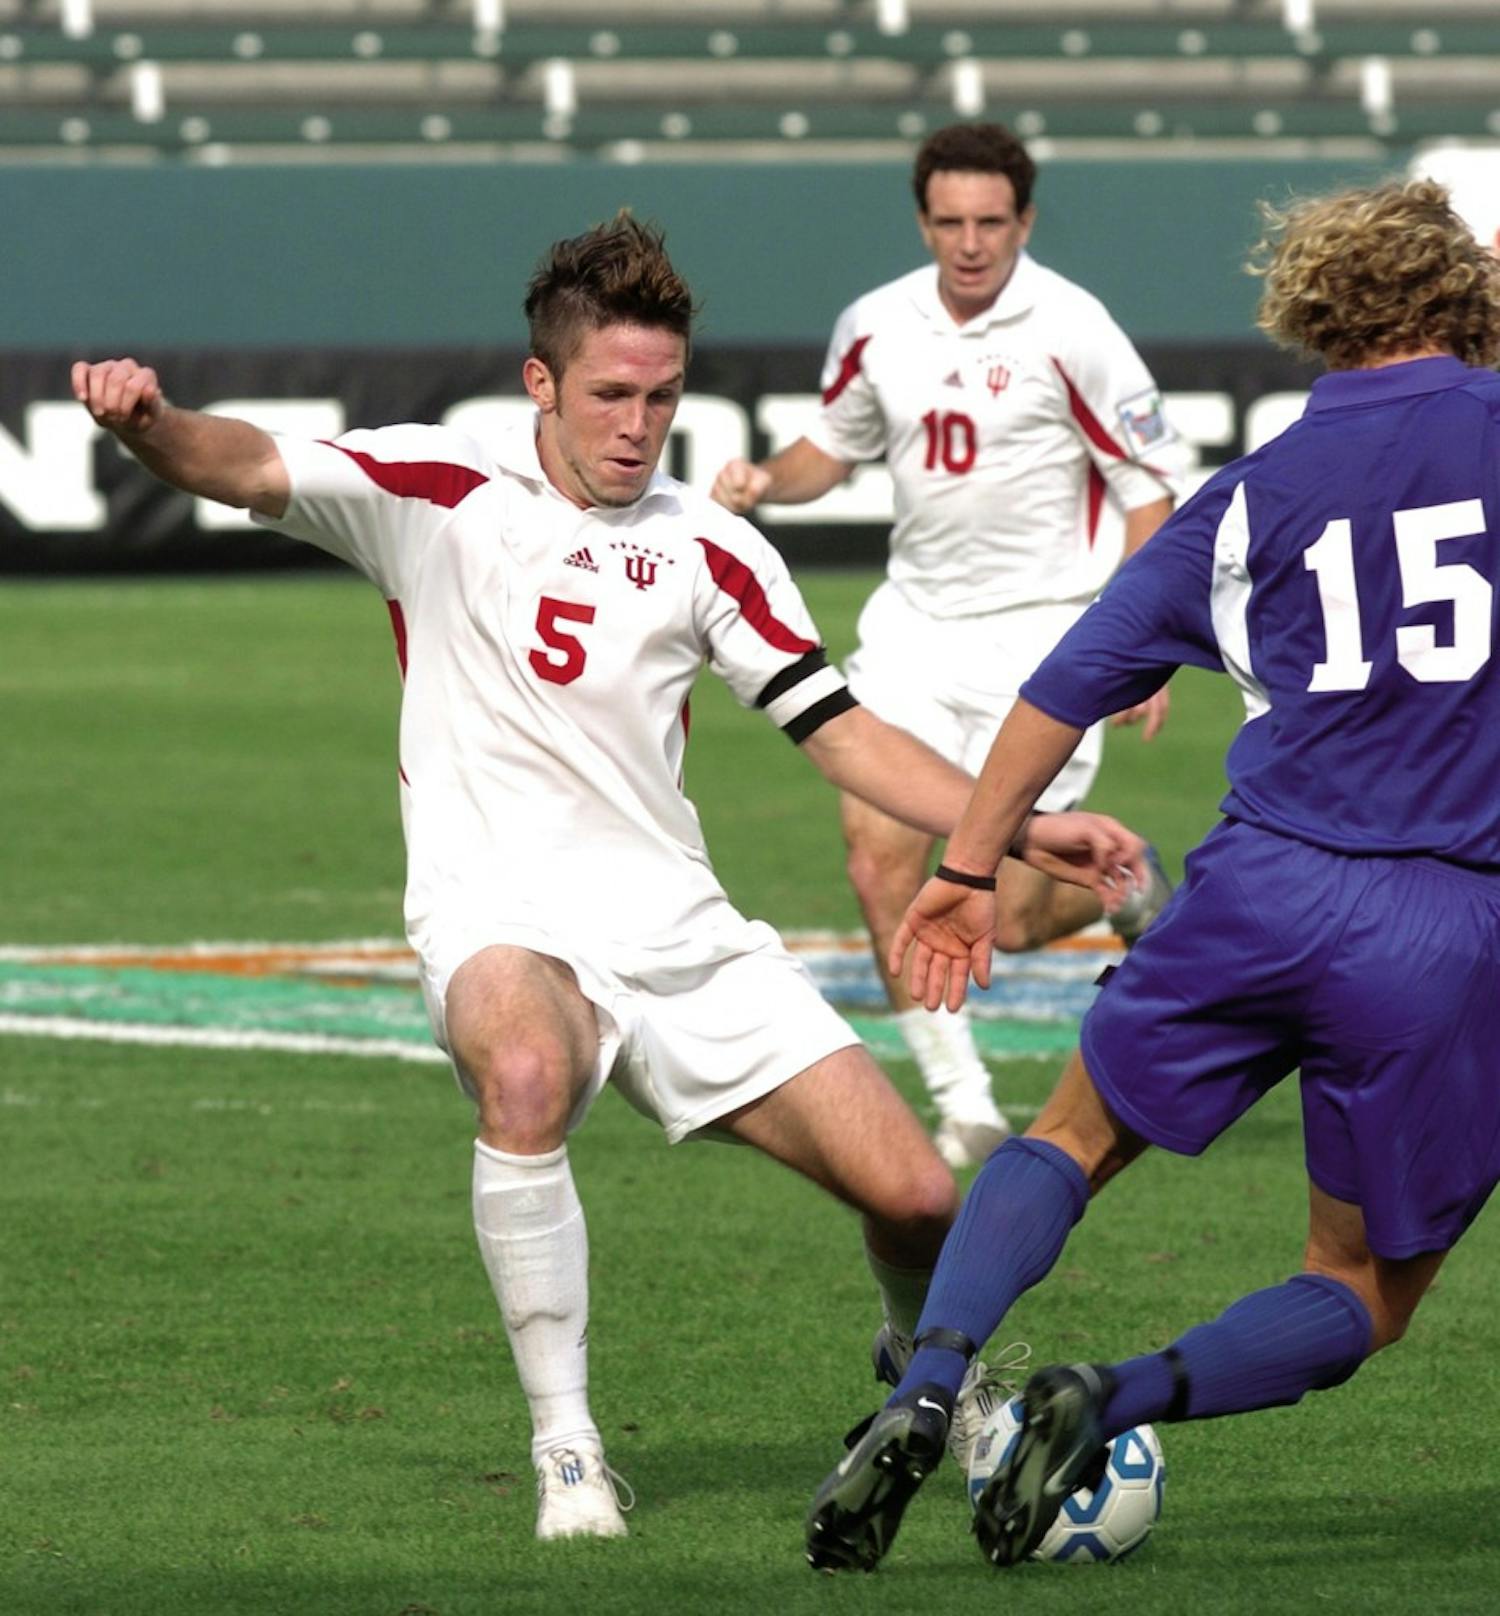 IU senior midfielder Danny O’Rourke prepares to make a challenge against a University of California at Santa Barbara player during the 2004 NCAA College Cup Final played at the StubHub Center, then known as the Home Depot Center, in Carson, California. O'Rourke was named an assistant coach for the IU soccer team on Wednesday.